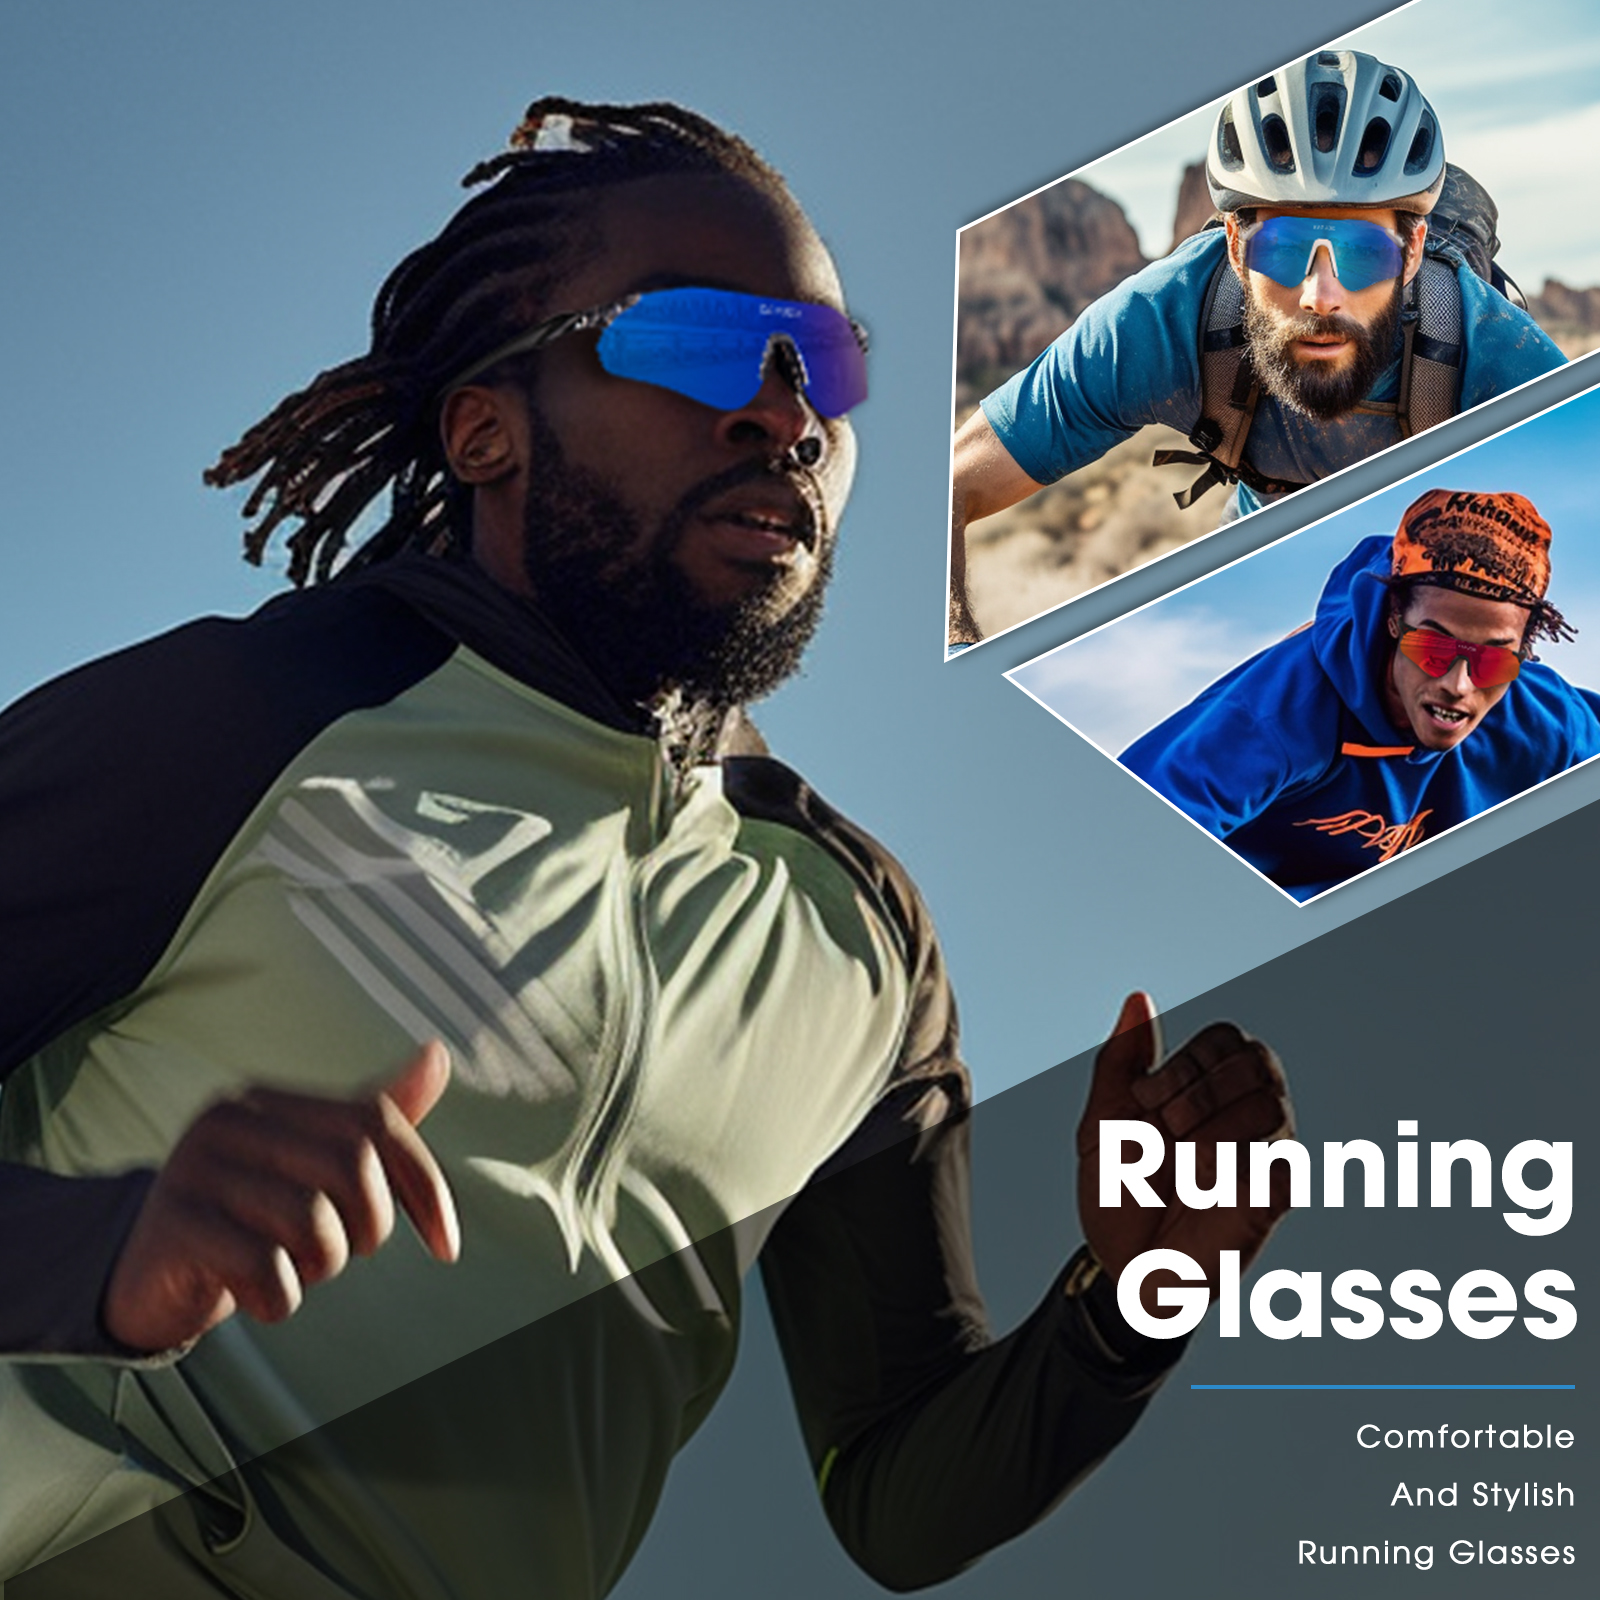 Super Light Running Photochromic Cycling Sunglasses Men Women Trendy  Rimless One Piece Outdoor Sports Goggles, Free Shipping New Users